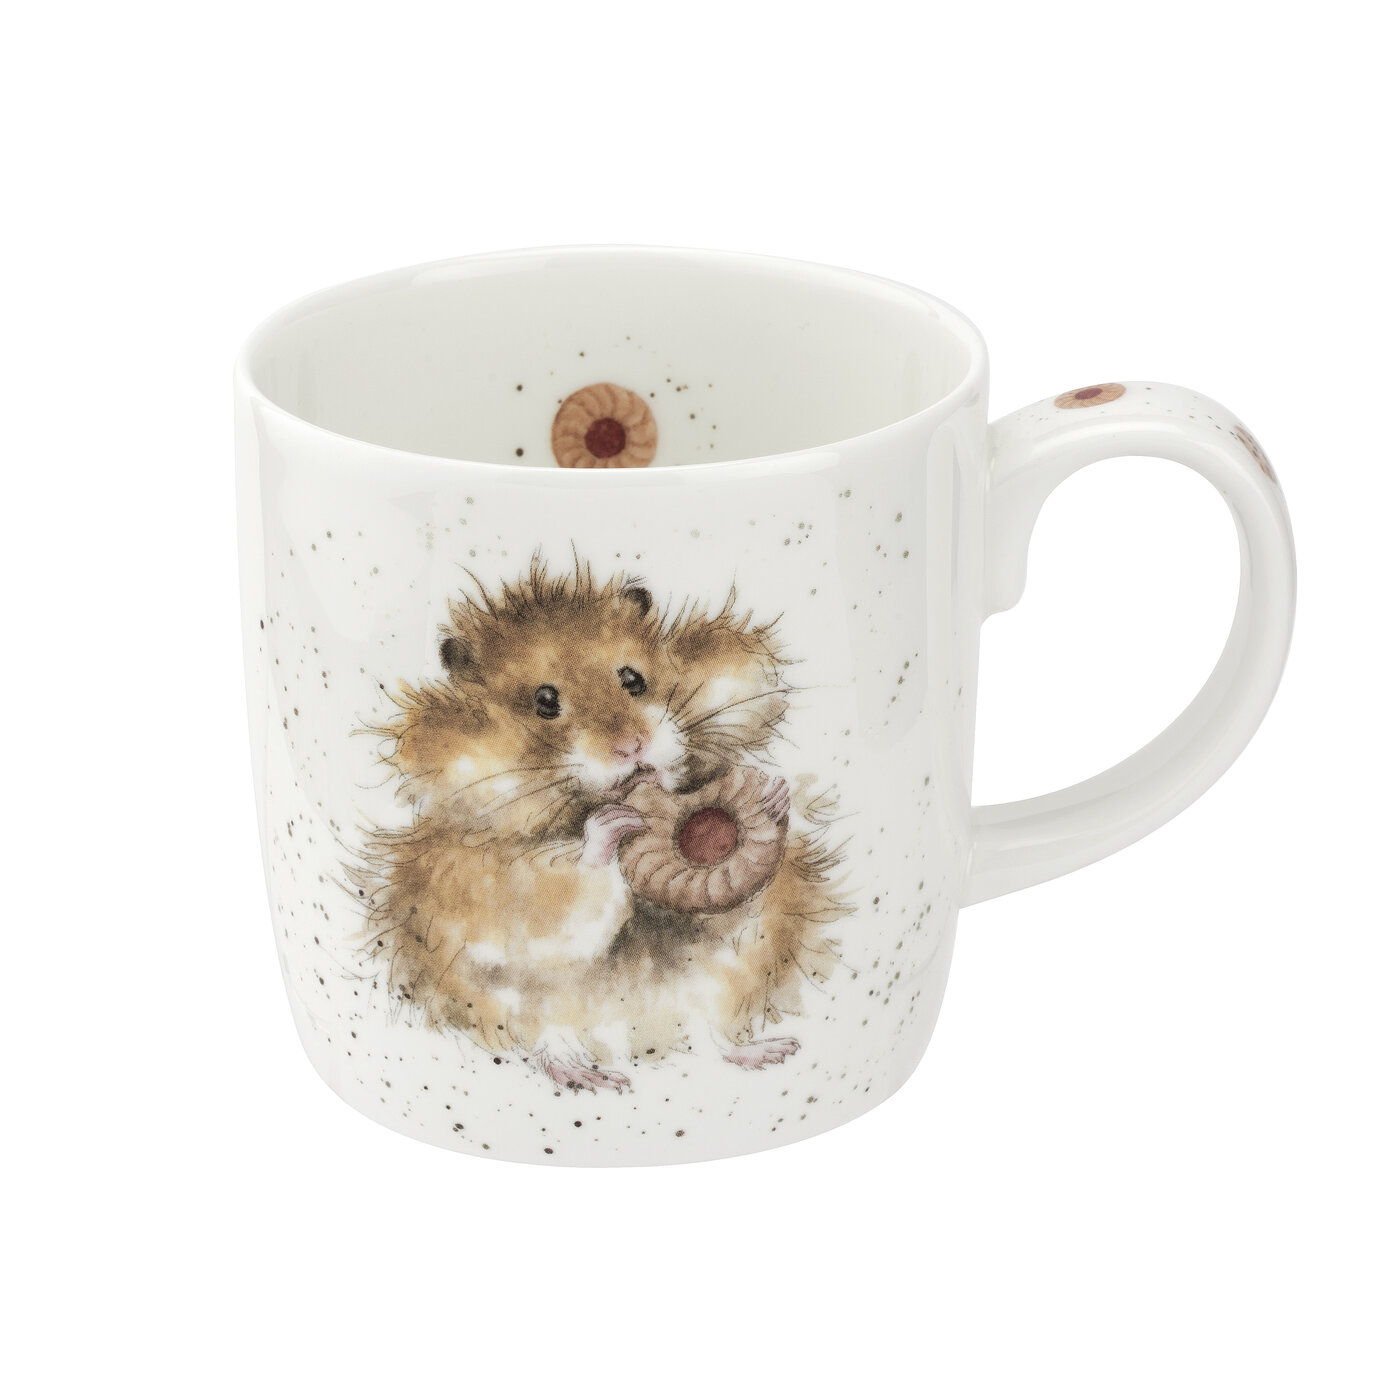 Diet Starts Tomorrow 14 Ounce Mug (Hamster) image number null